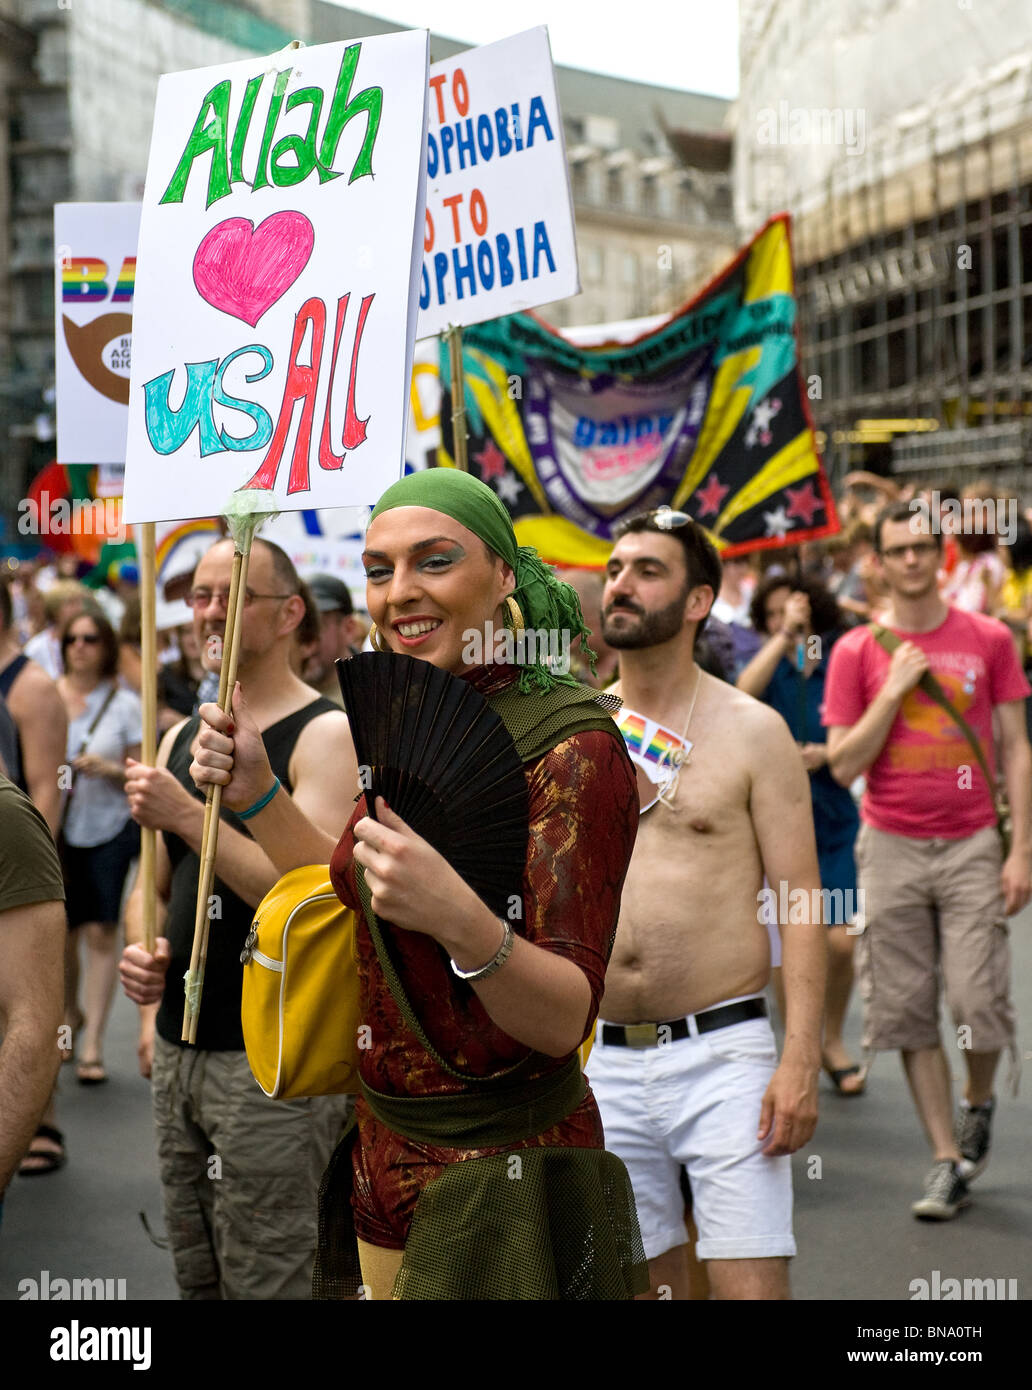 a-gay-muslim-carrying-a-placard-during-the-pride-london-celebrations-BNA0TH.jpg